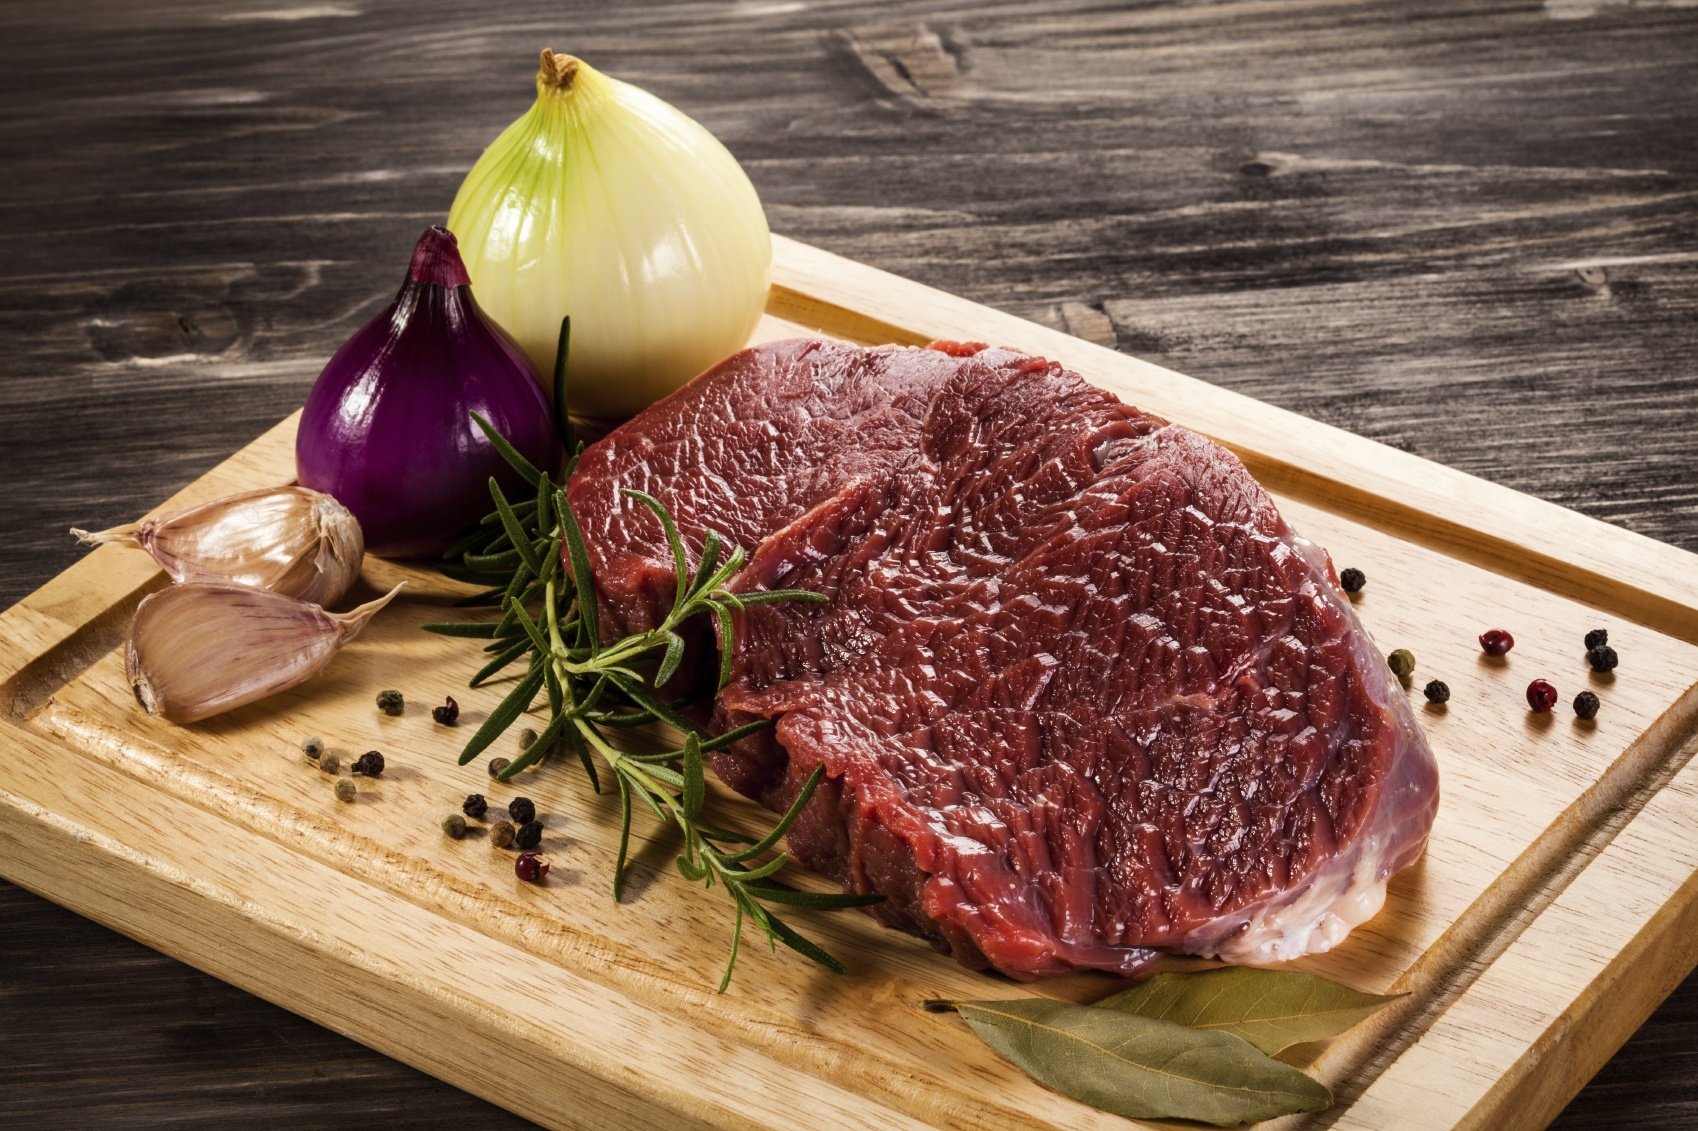 Red Meat for Health: A Recent WHO/IARC Ruling